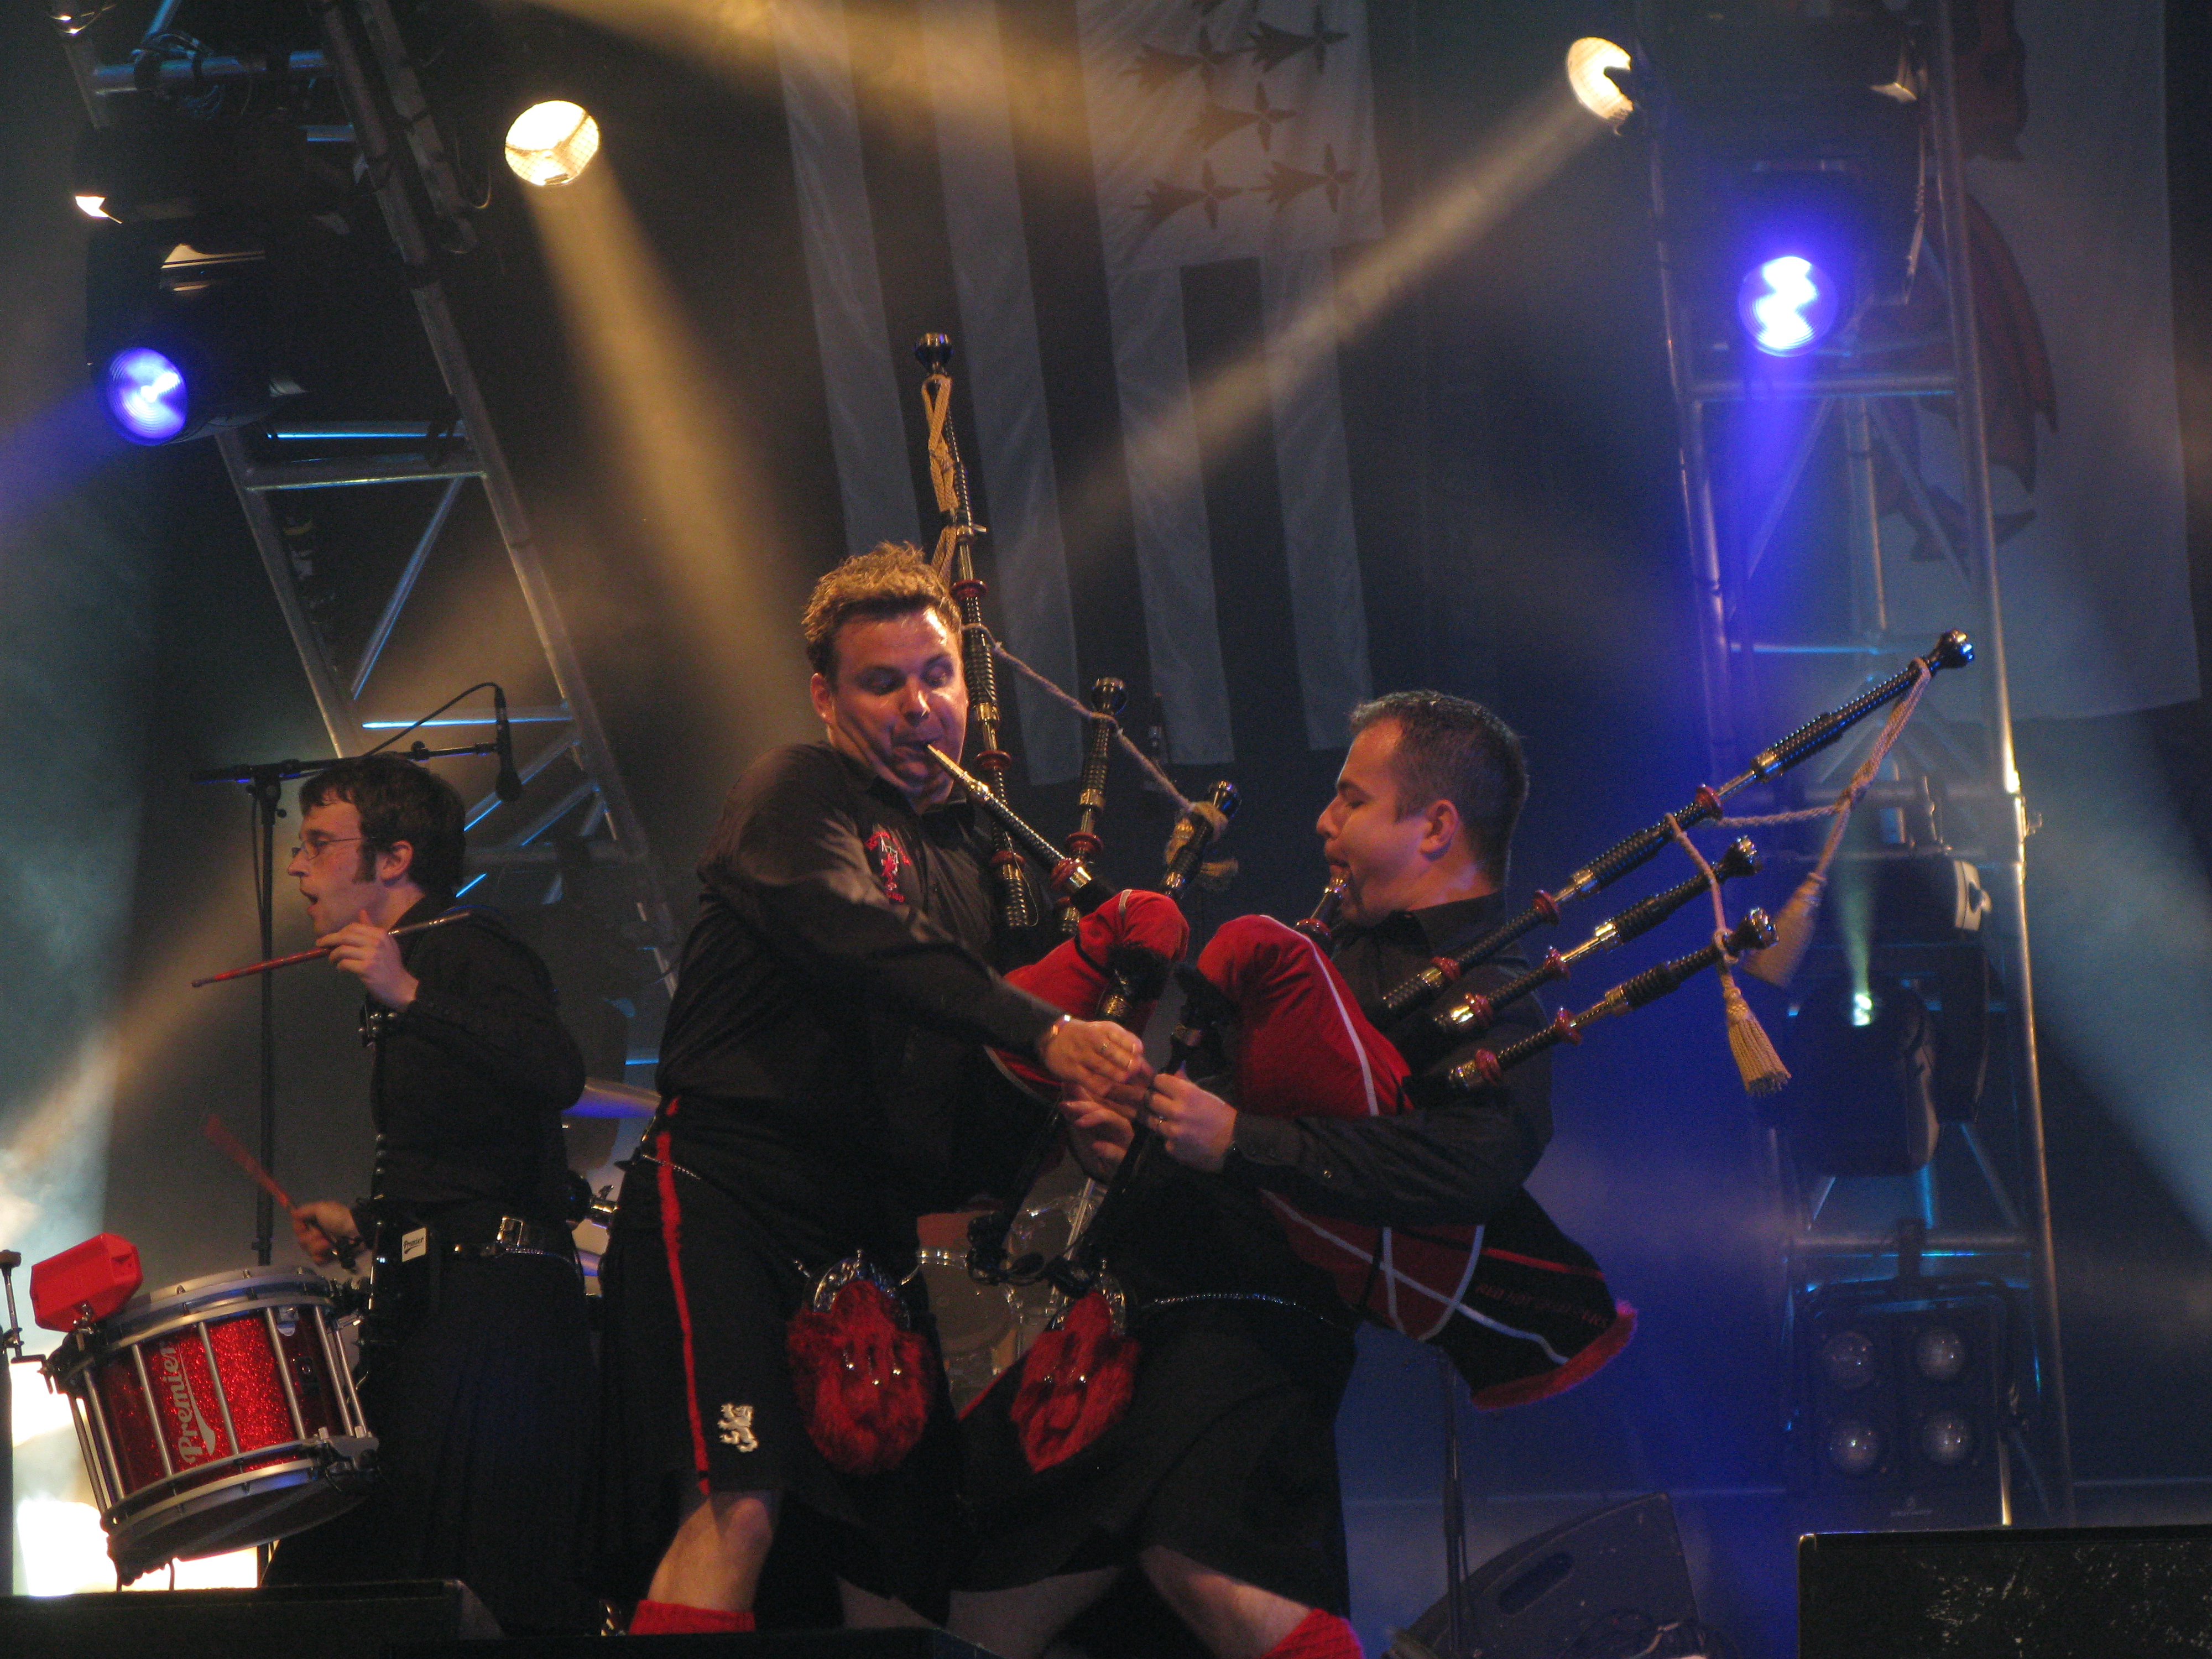 Red Chilli Pipers – Wikipédia, a enciclopédia